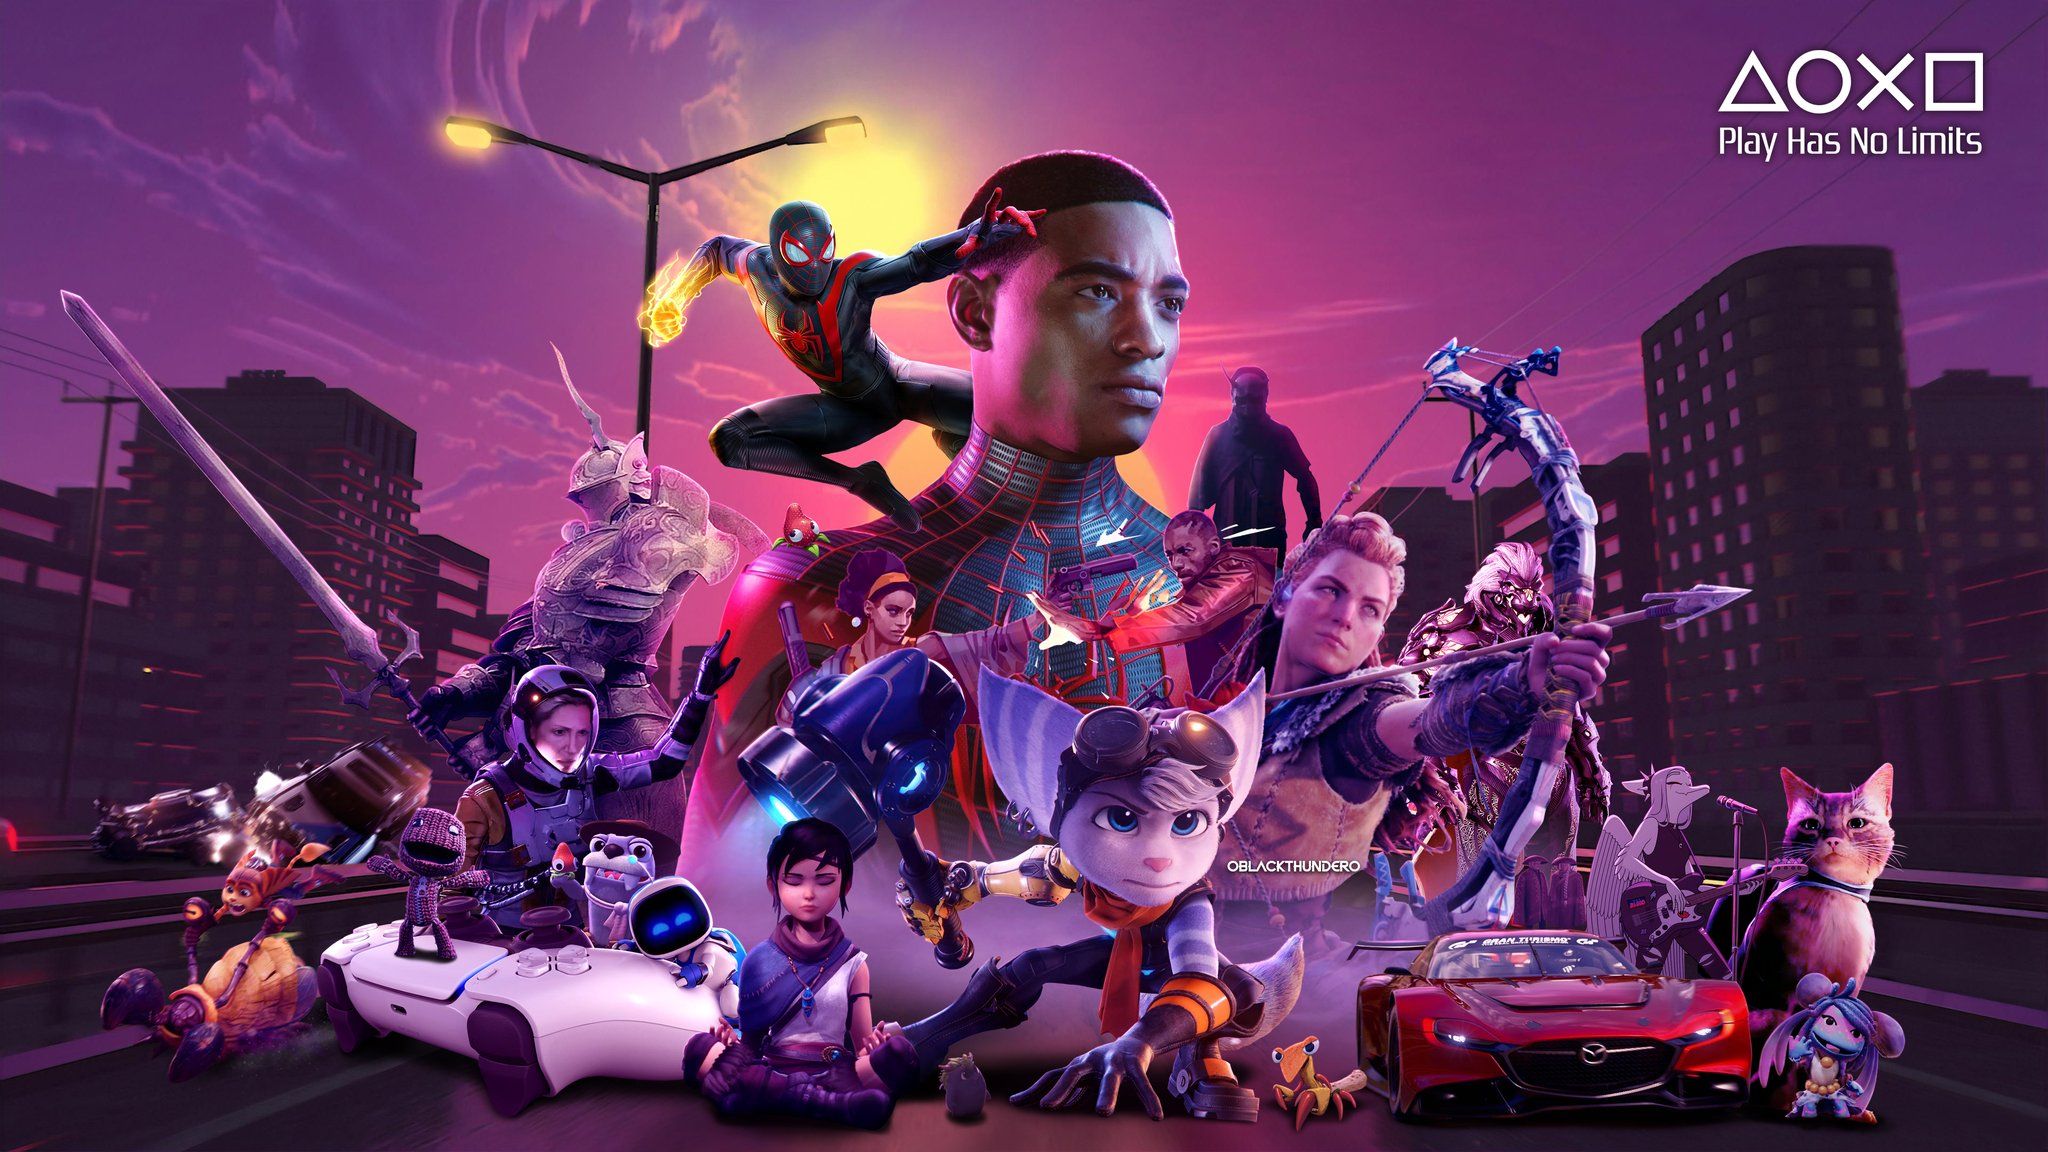 PS5 Games Exclusive Launch Lineup OBlackThunderO PlayStation 5 Play Has No Limits Art Gaming